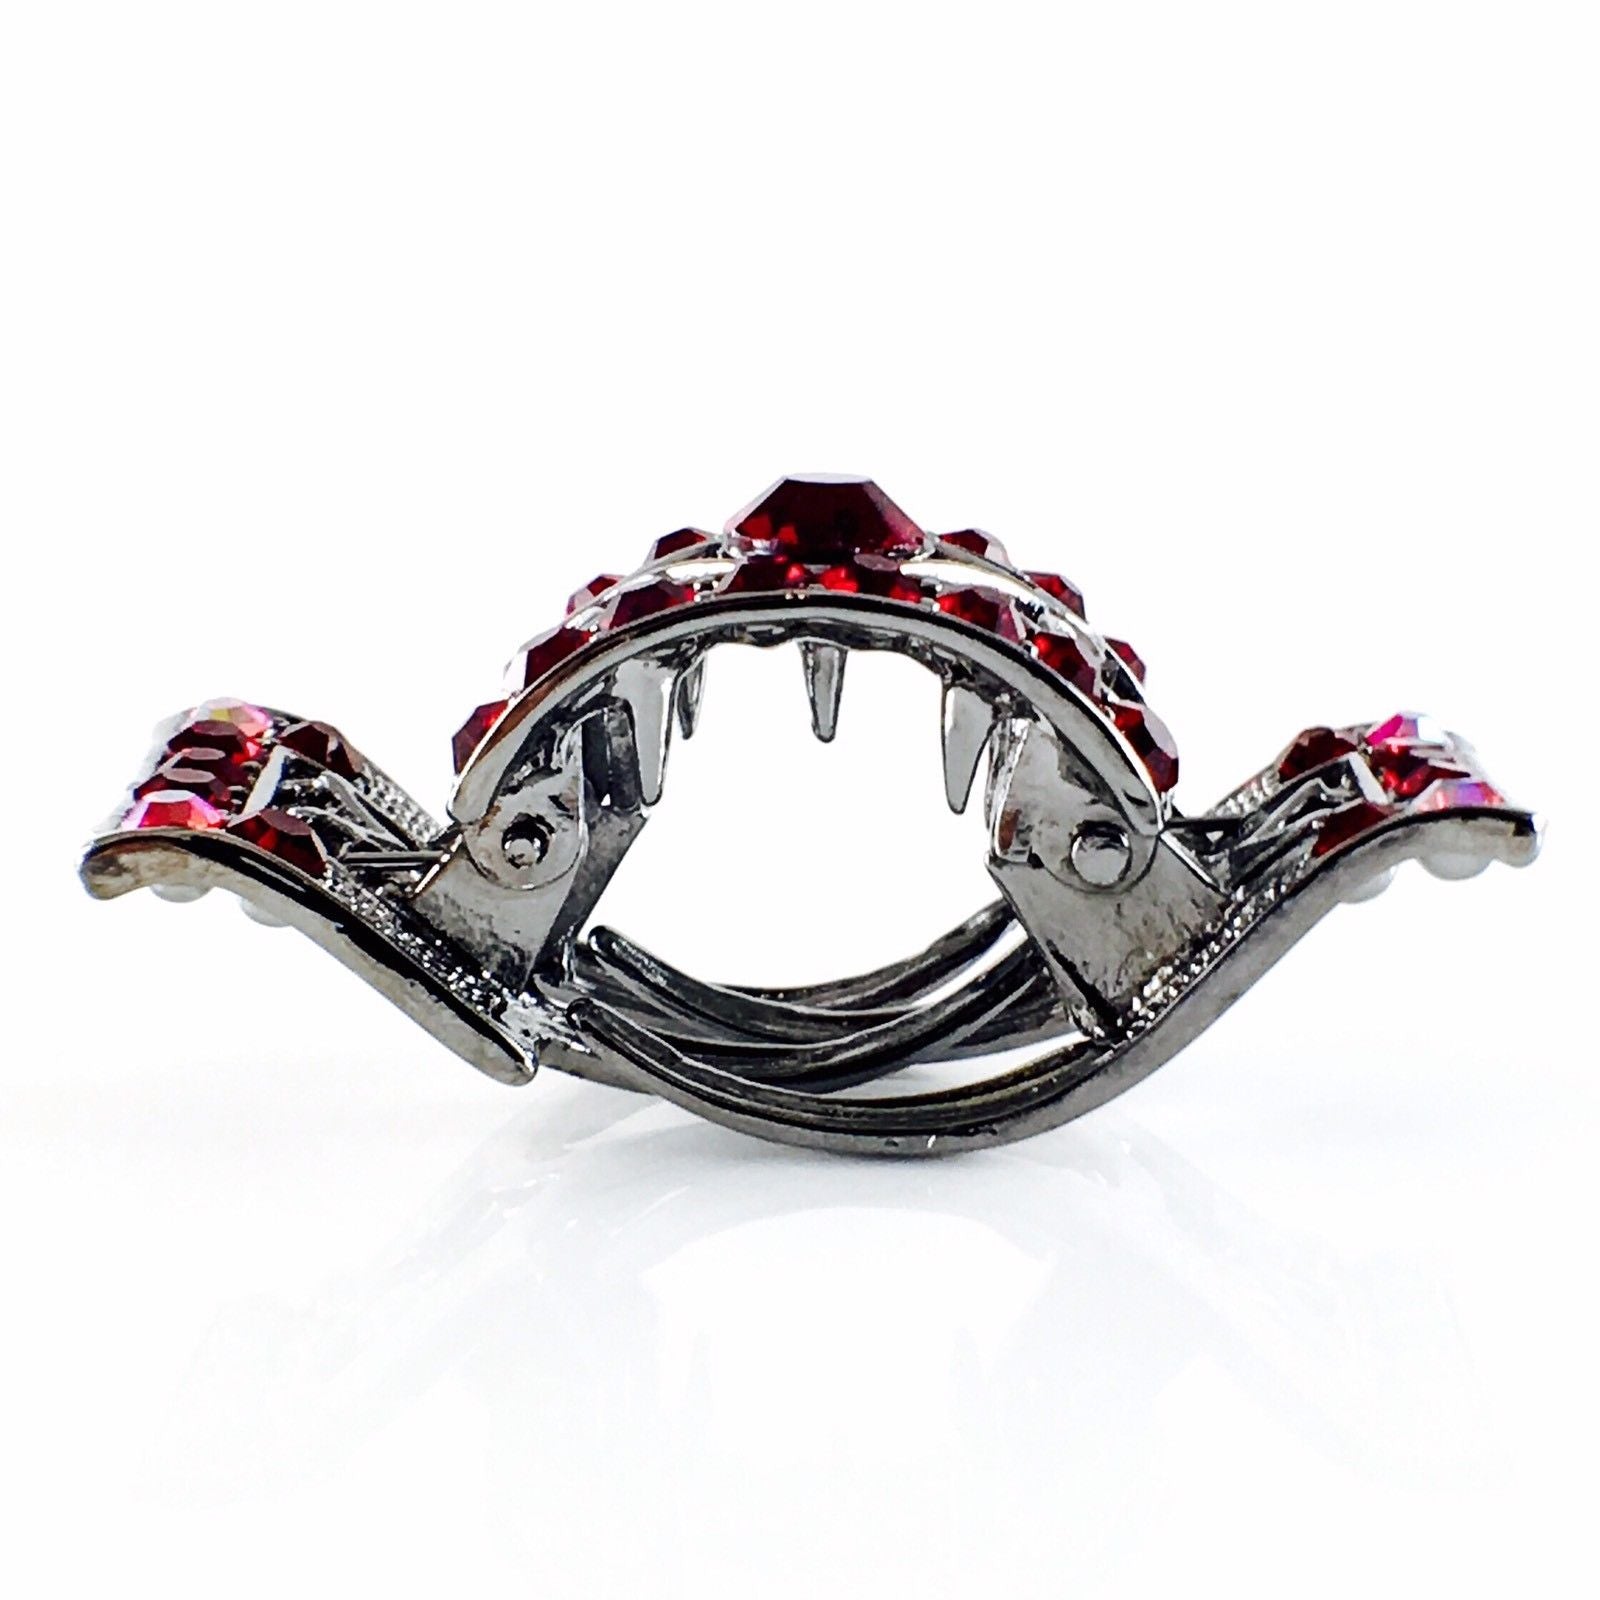 Castle Square Hair Claw Jaw Clip vintage use Rhinestone Crystal silver base Red, Hair Claw - MOGHANT